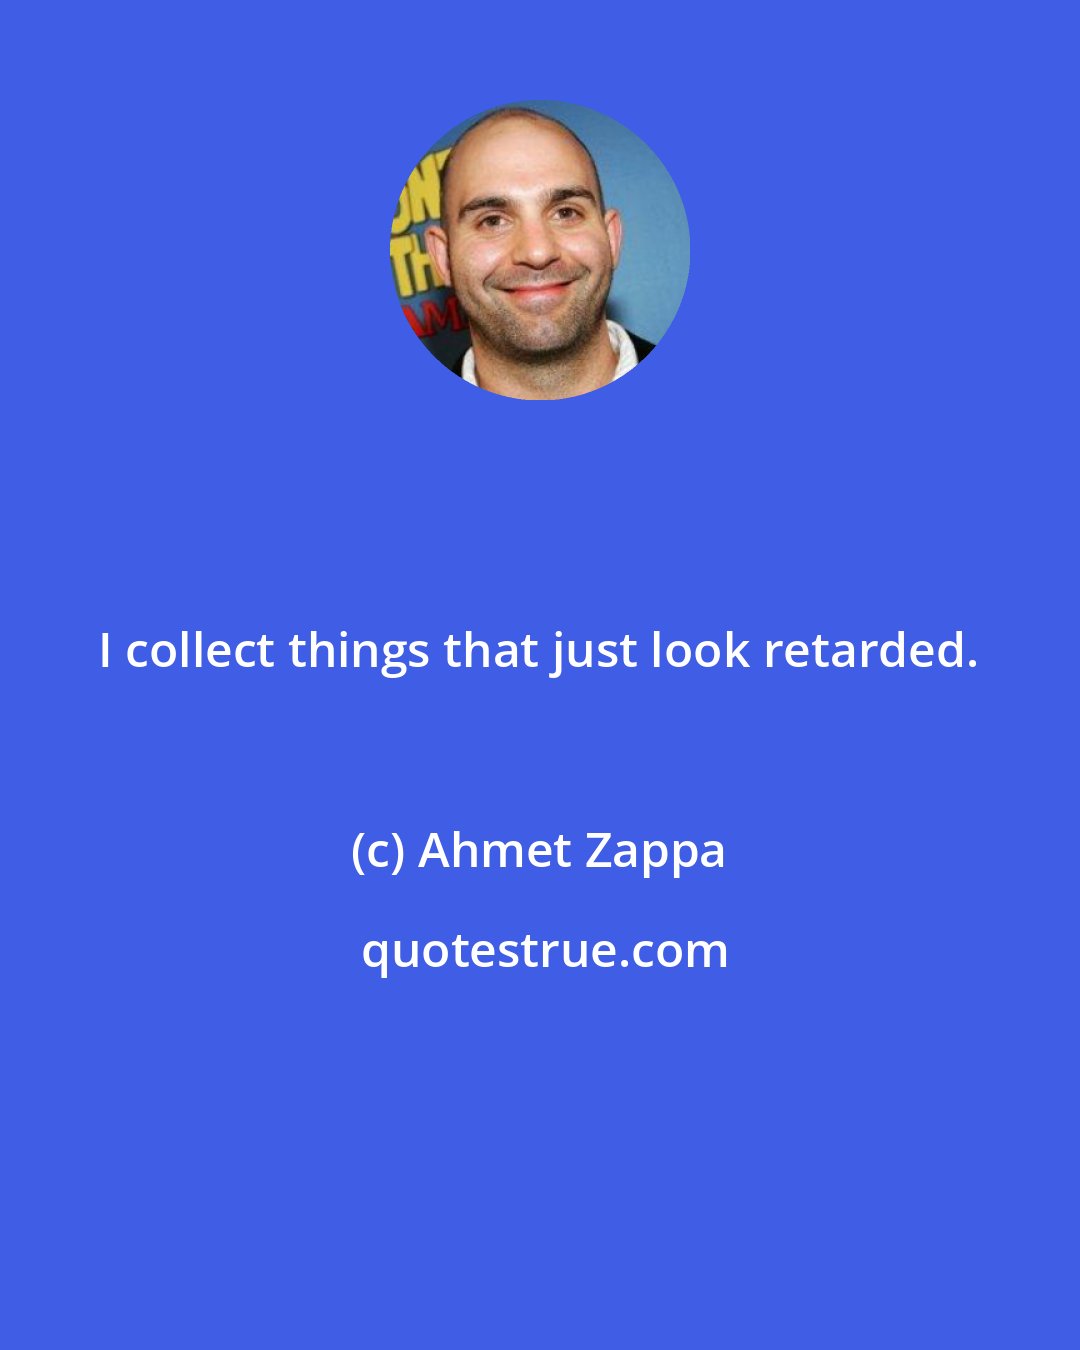 Ahmet Zappa: I collect things that just look retarded.